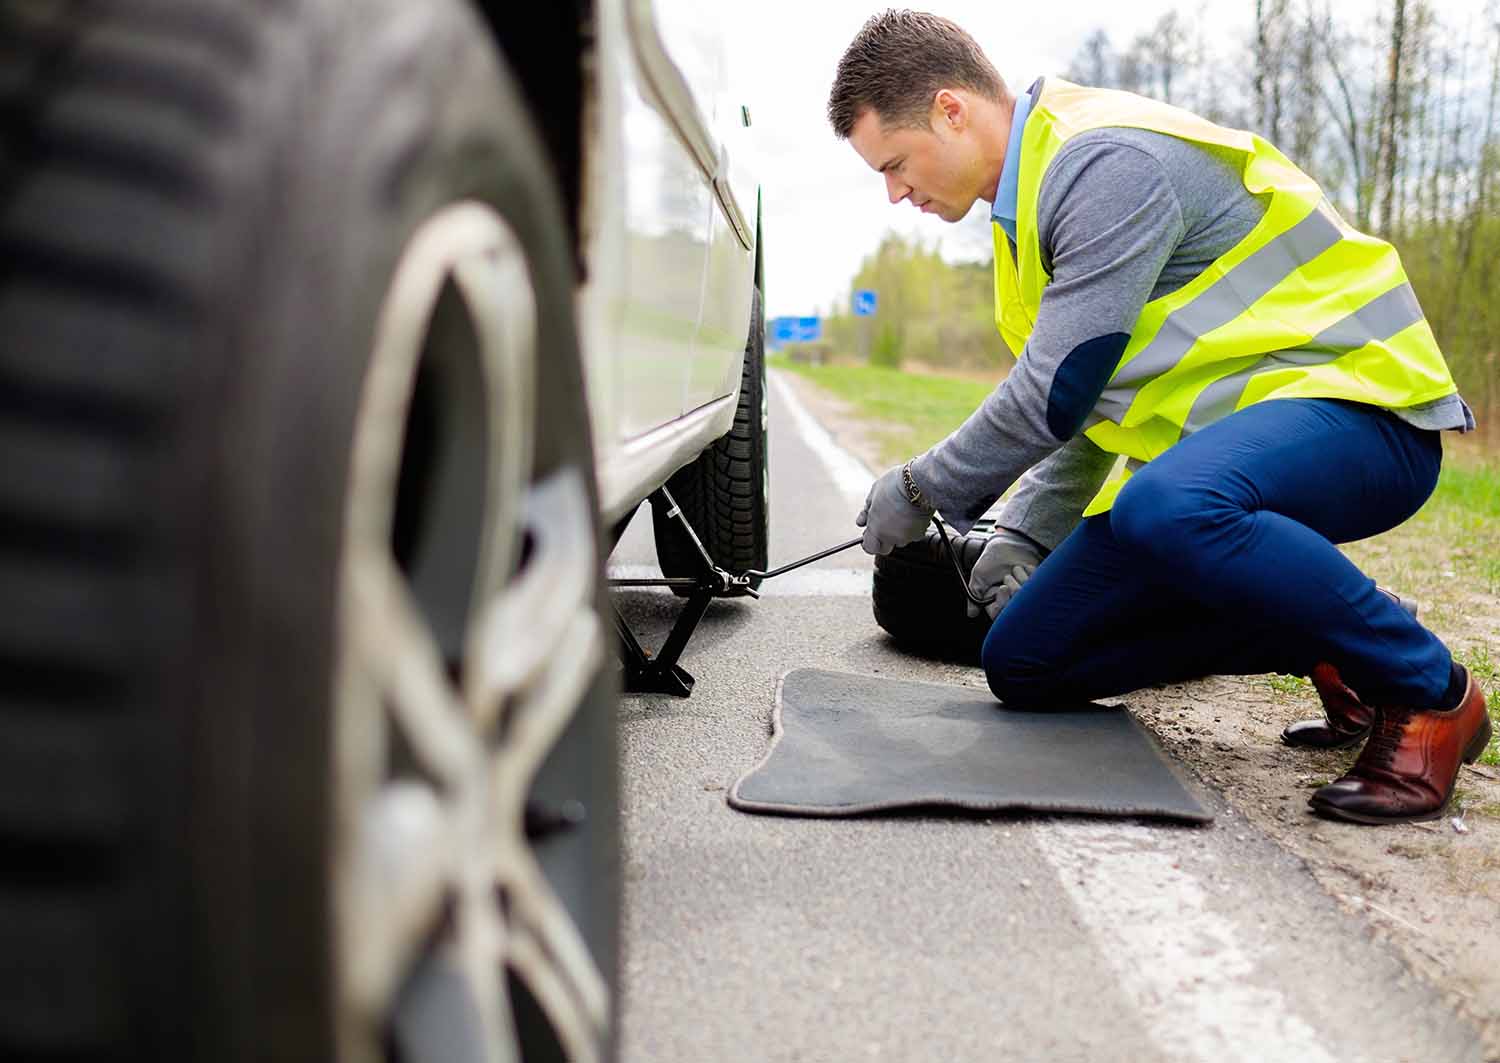 Step By Step on How to Change a Flat Tire 